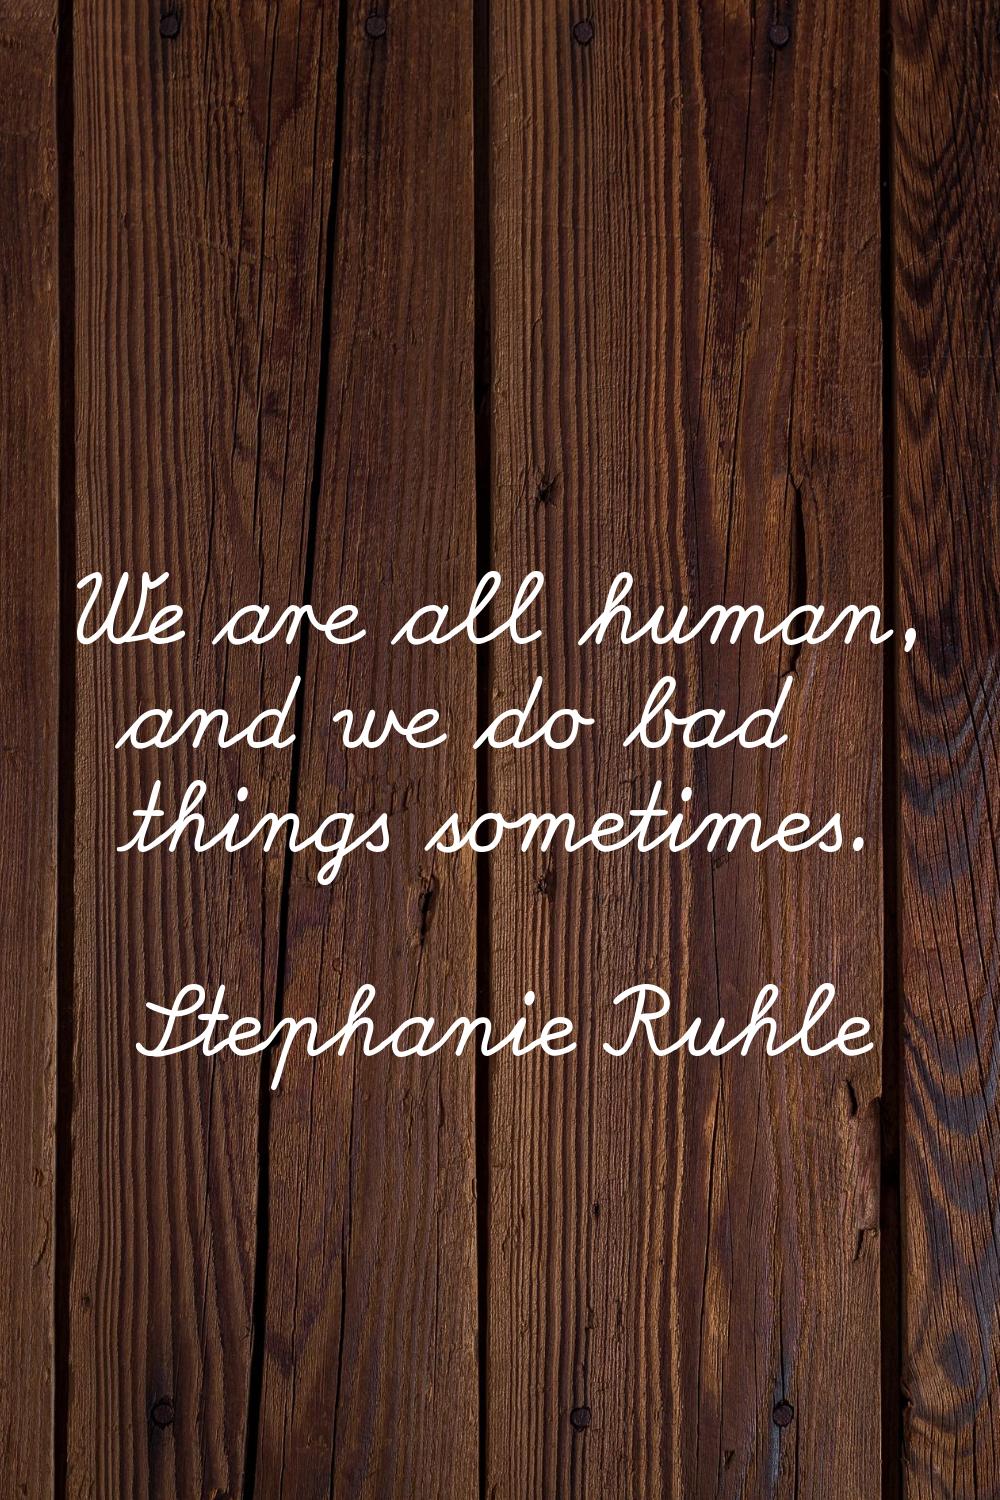 We are all human, and we do bad things sometimes.